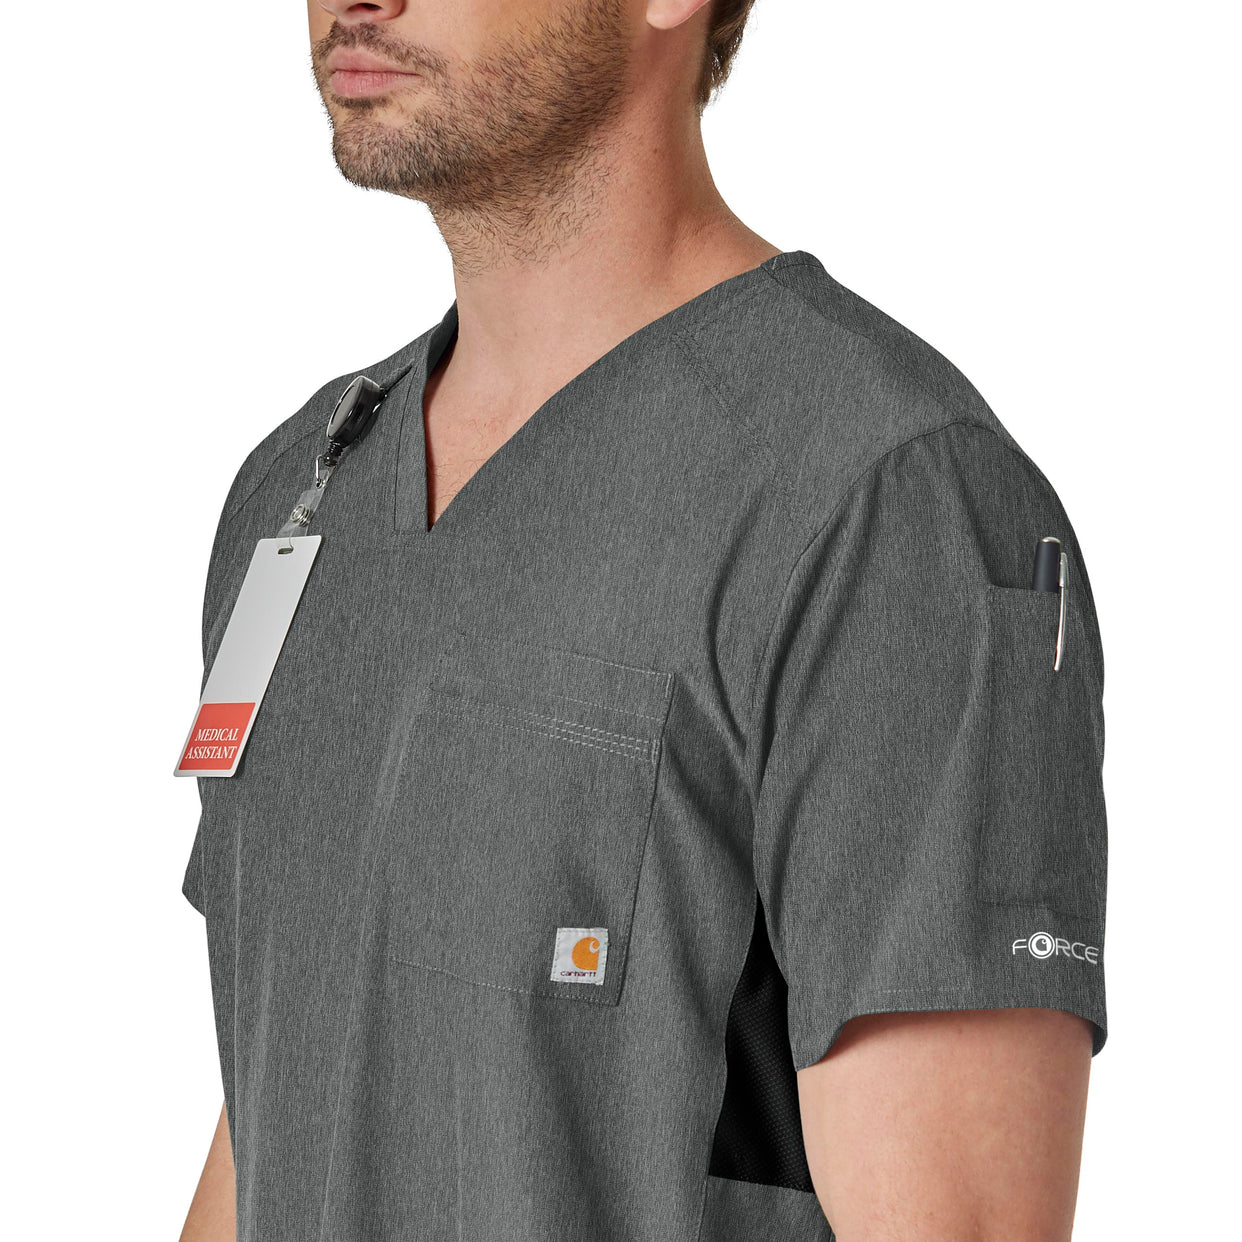 Force Liberty Men's Twill Chest Pocket Scrub Top Charcoal Heather side view